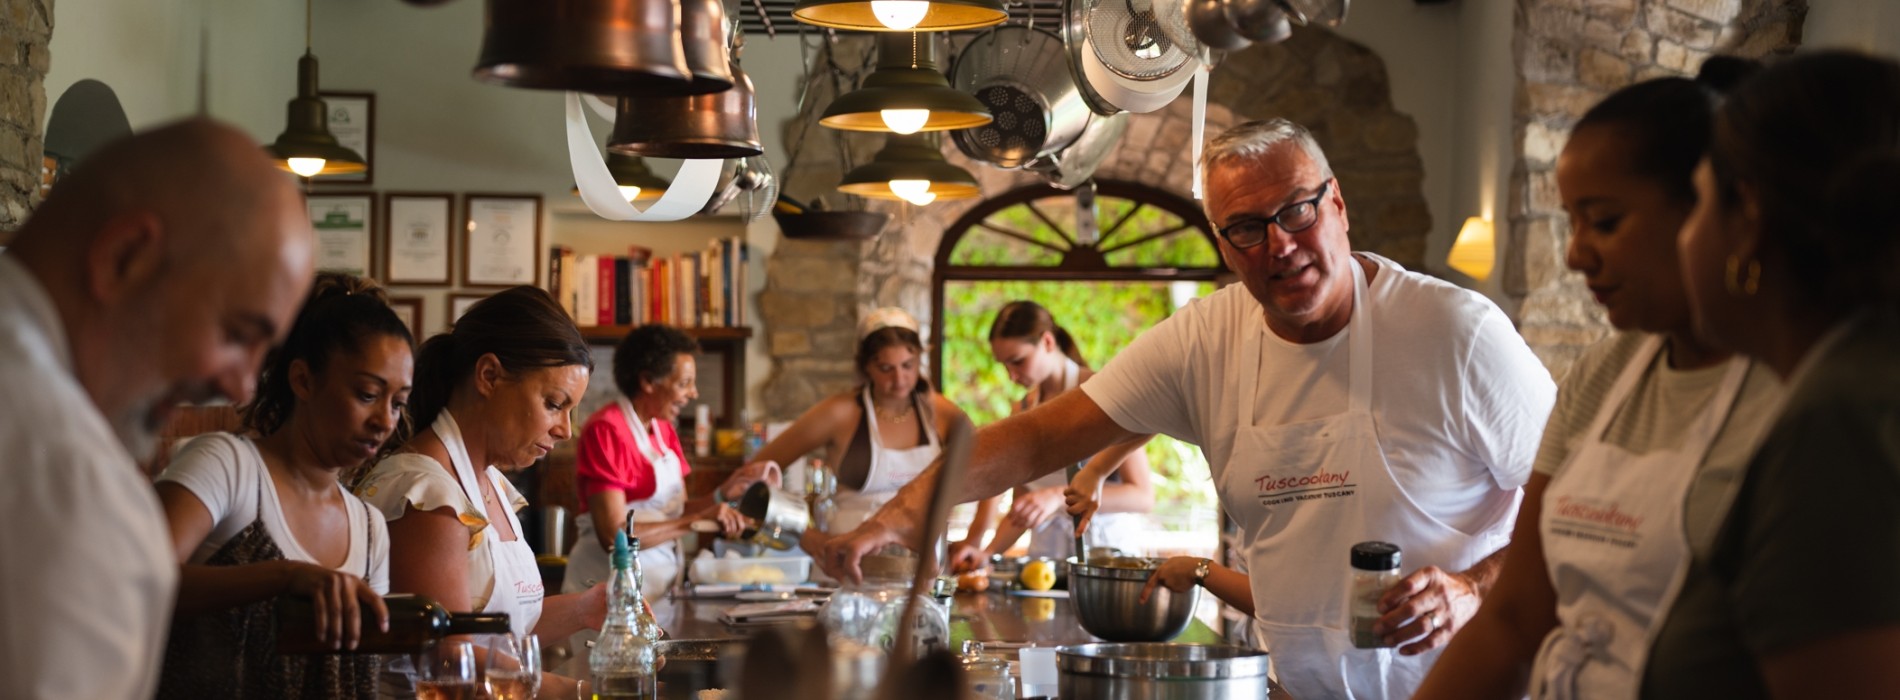 "If you want to learn about Italian cooking and Tuscan culture then this the place"